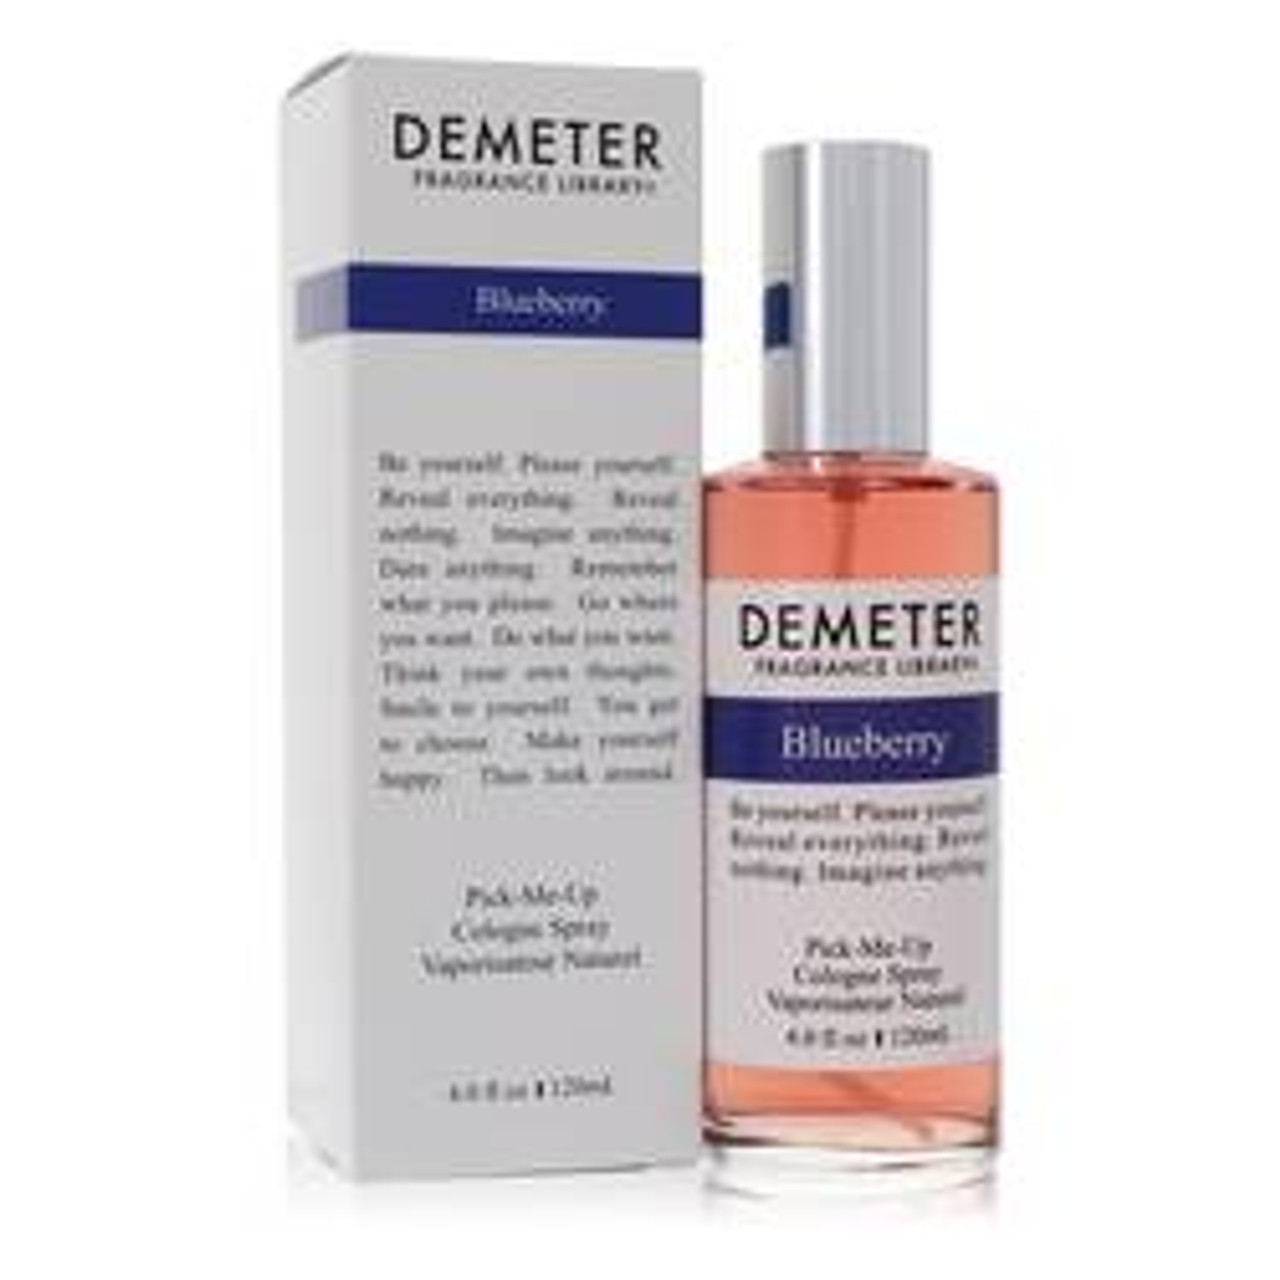 Demeter Blueberry Perfume By Demeter Cologne Spray 4 oz for Women - [From 79.50 - Choose pk Qty ] - *Ships from Miami